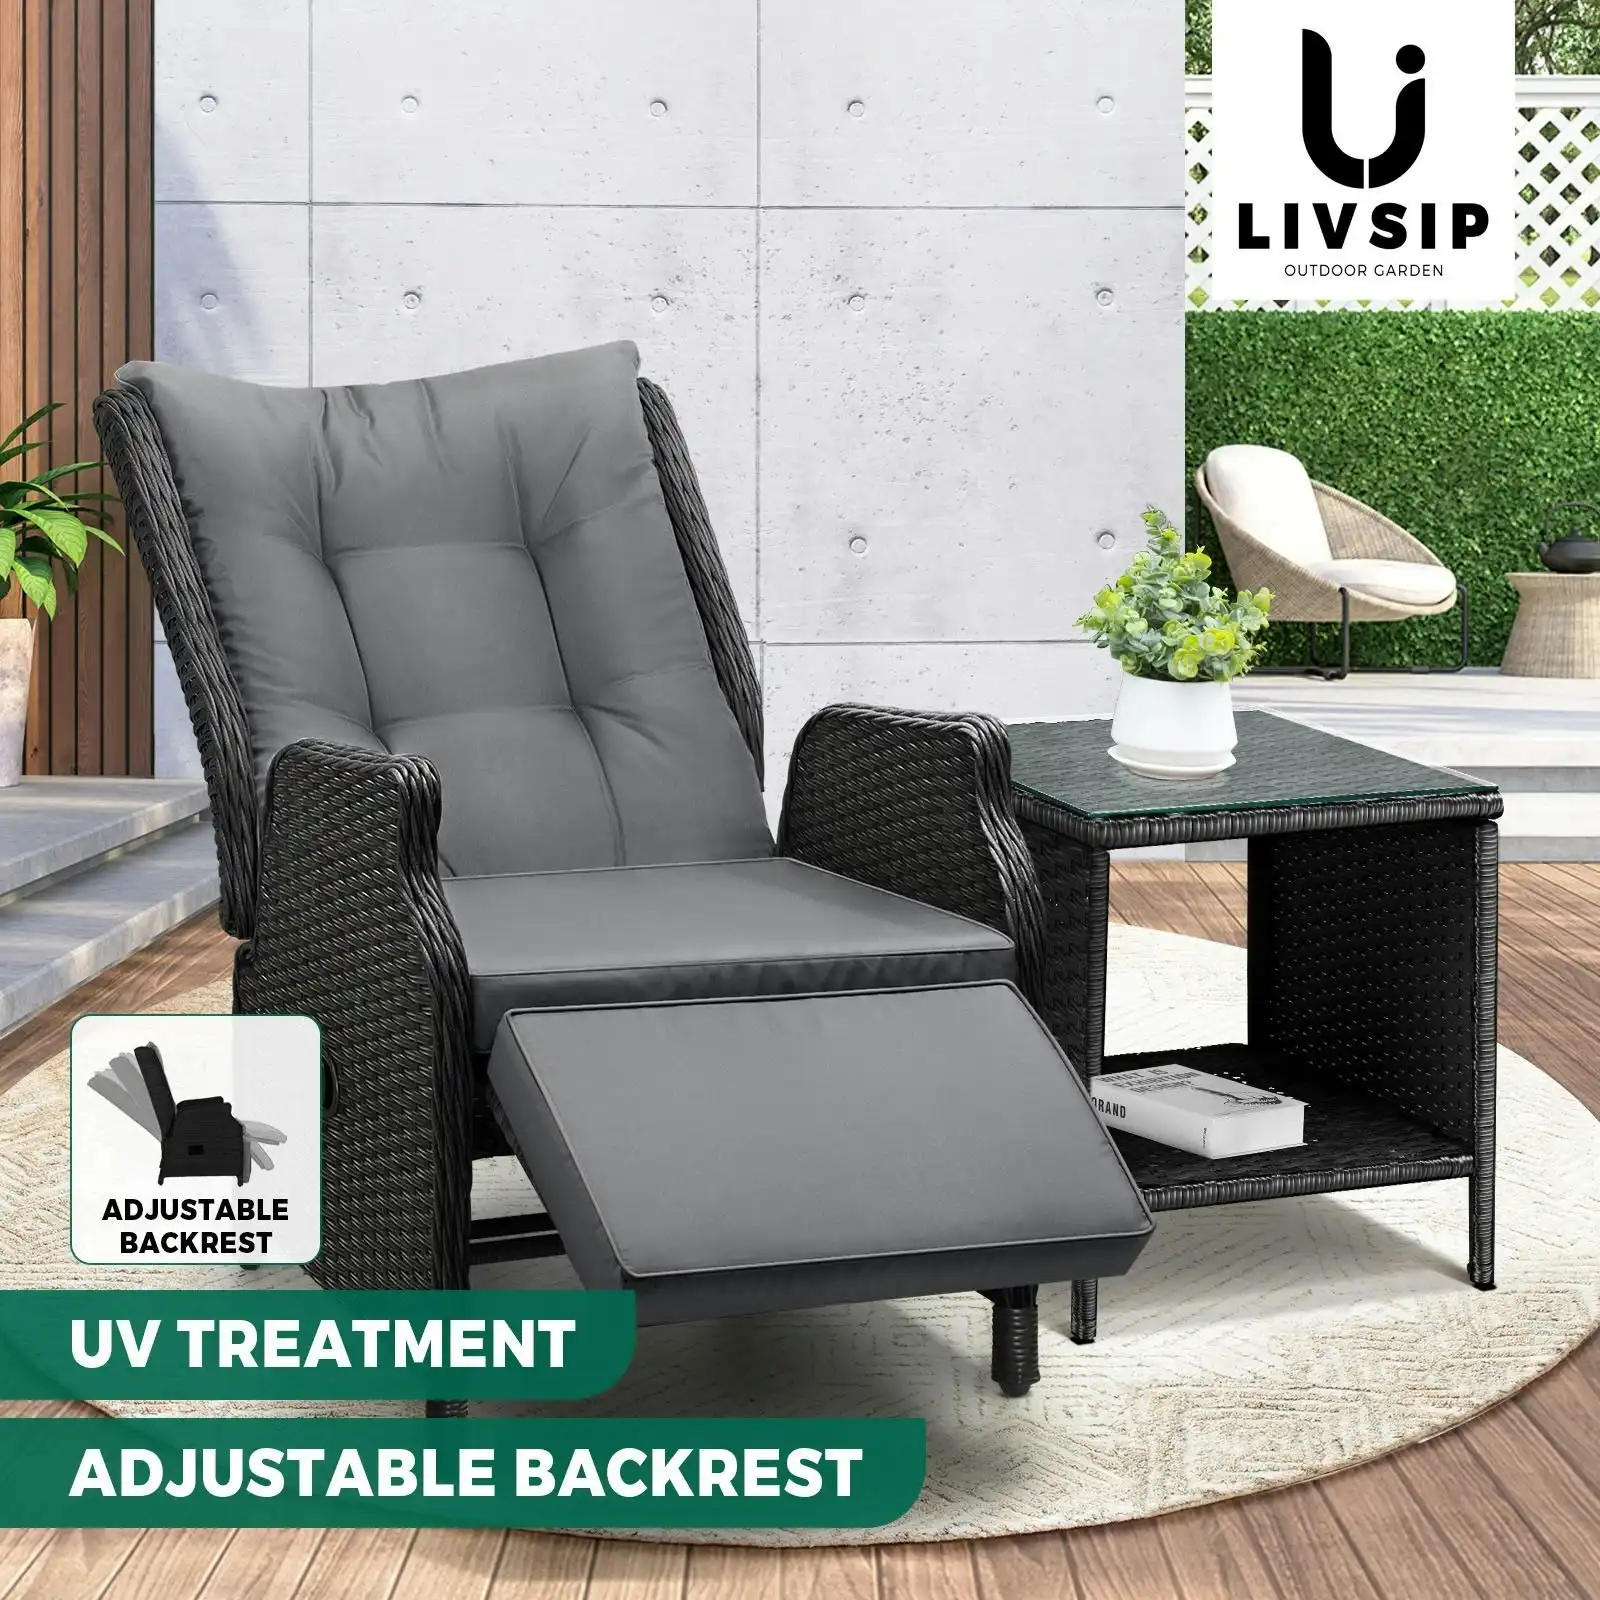 Livsip Outoodr Recliner Chair & Table Sun Lounge Outdoor Furniture Patio Setting